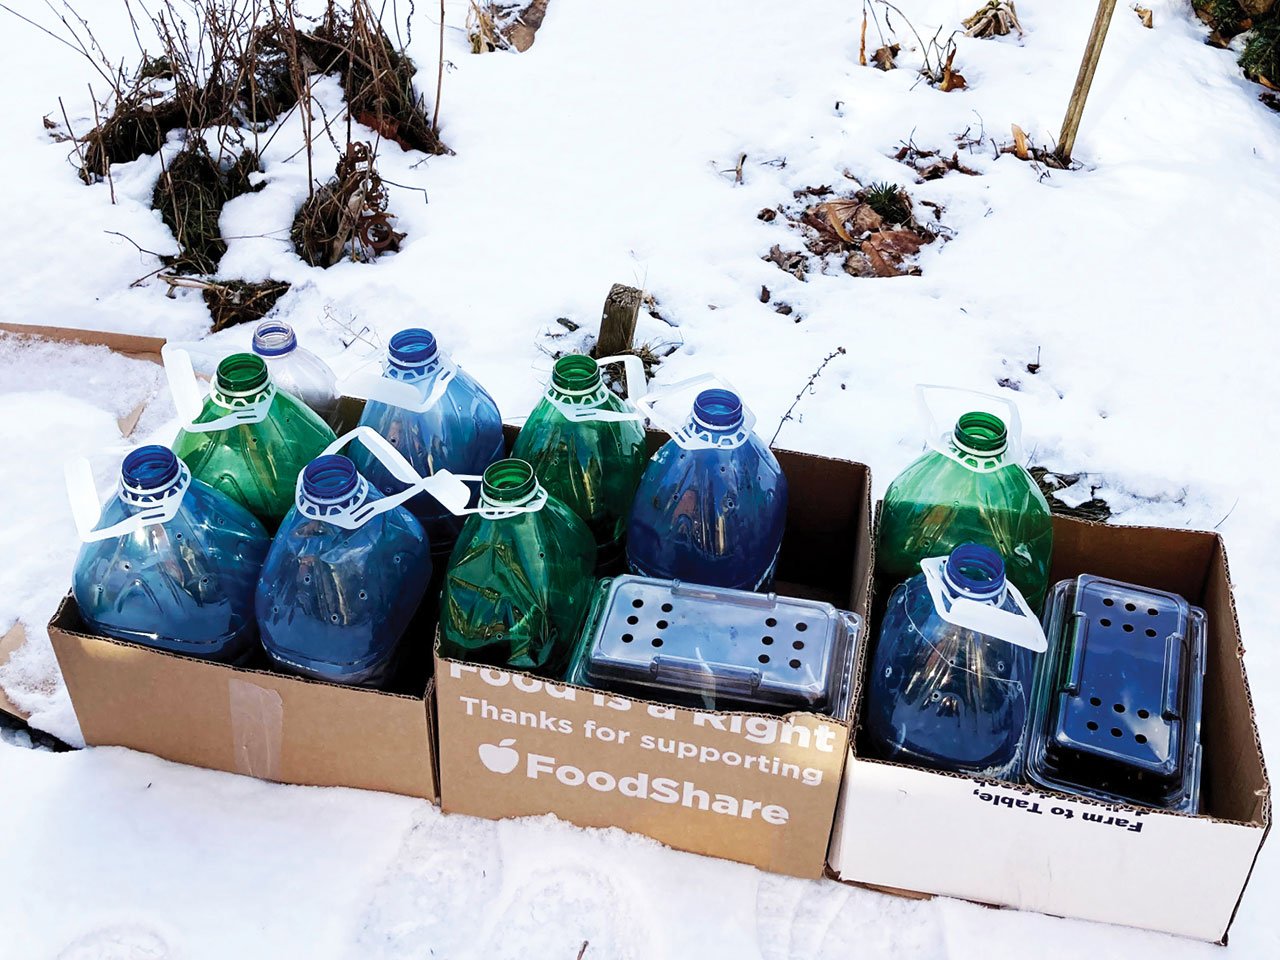 Three boxes in the snow, filled with empty, repurposed plastic bottles filled with dirt to start seeds for winter sowing